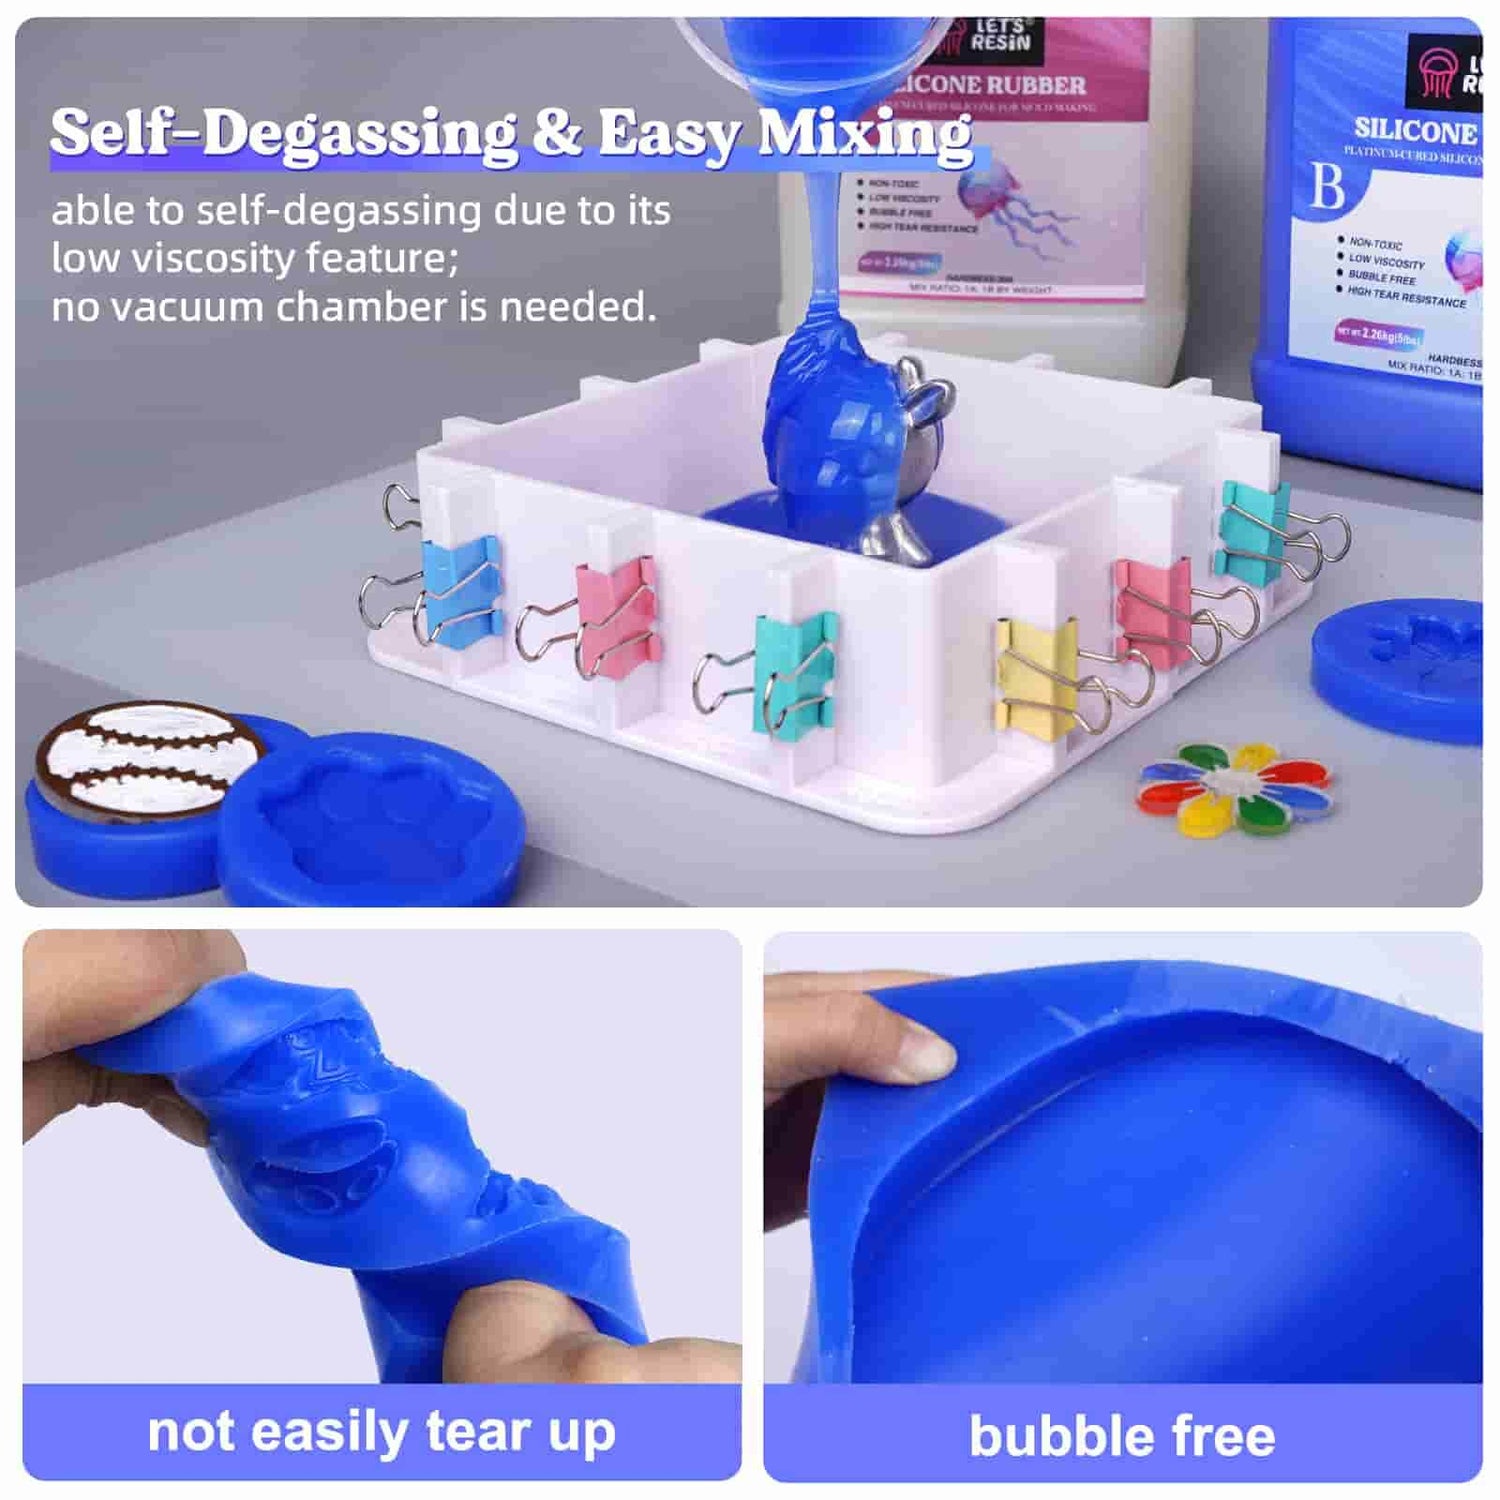 15A Silicone Rubber Mold Making Kit - N.W 20.46oz